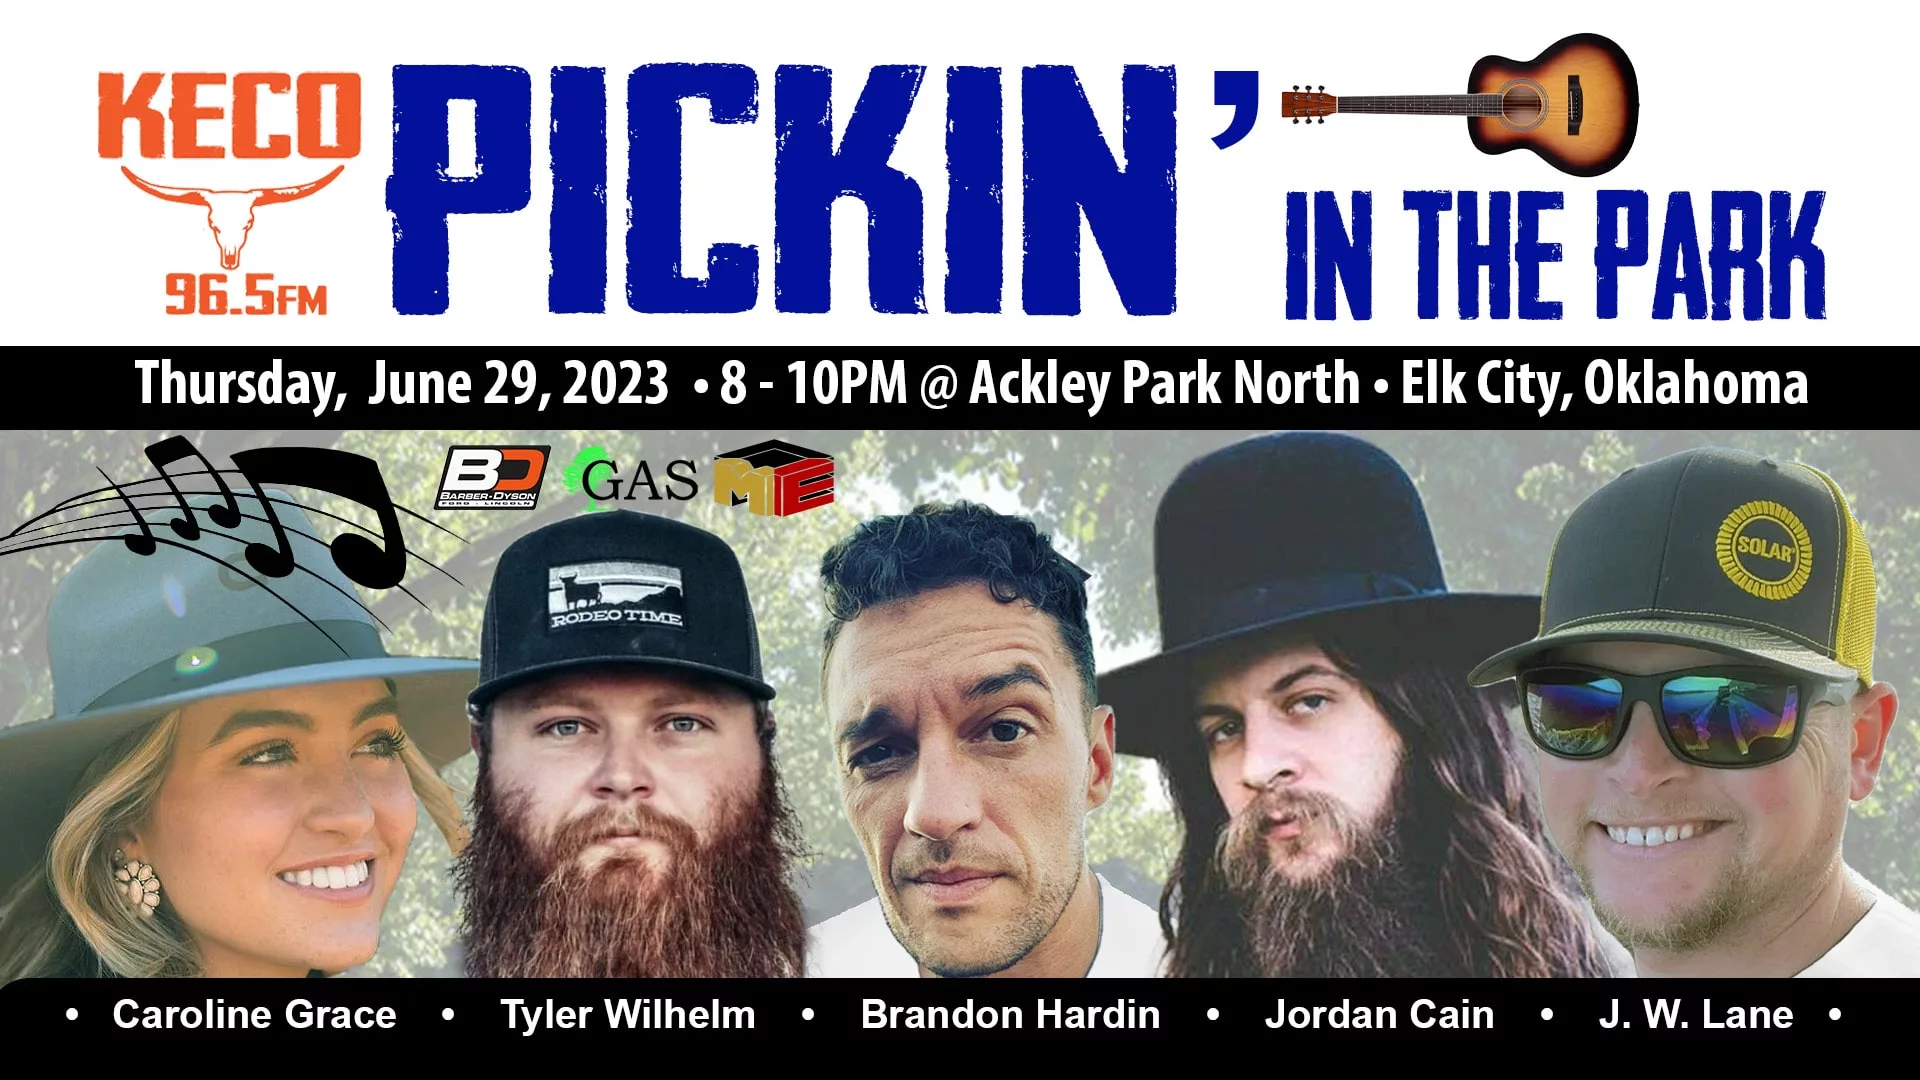 96.5FM KECO Pickin' in the Park - Featured Artists Flyer